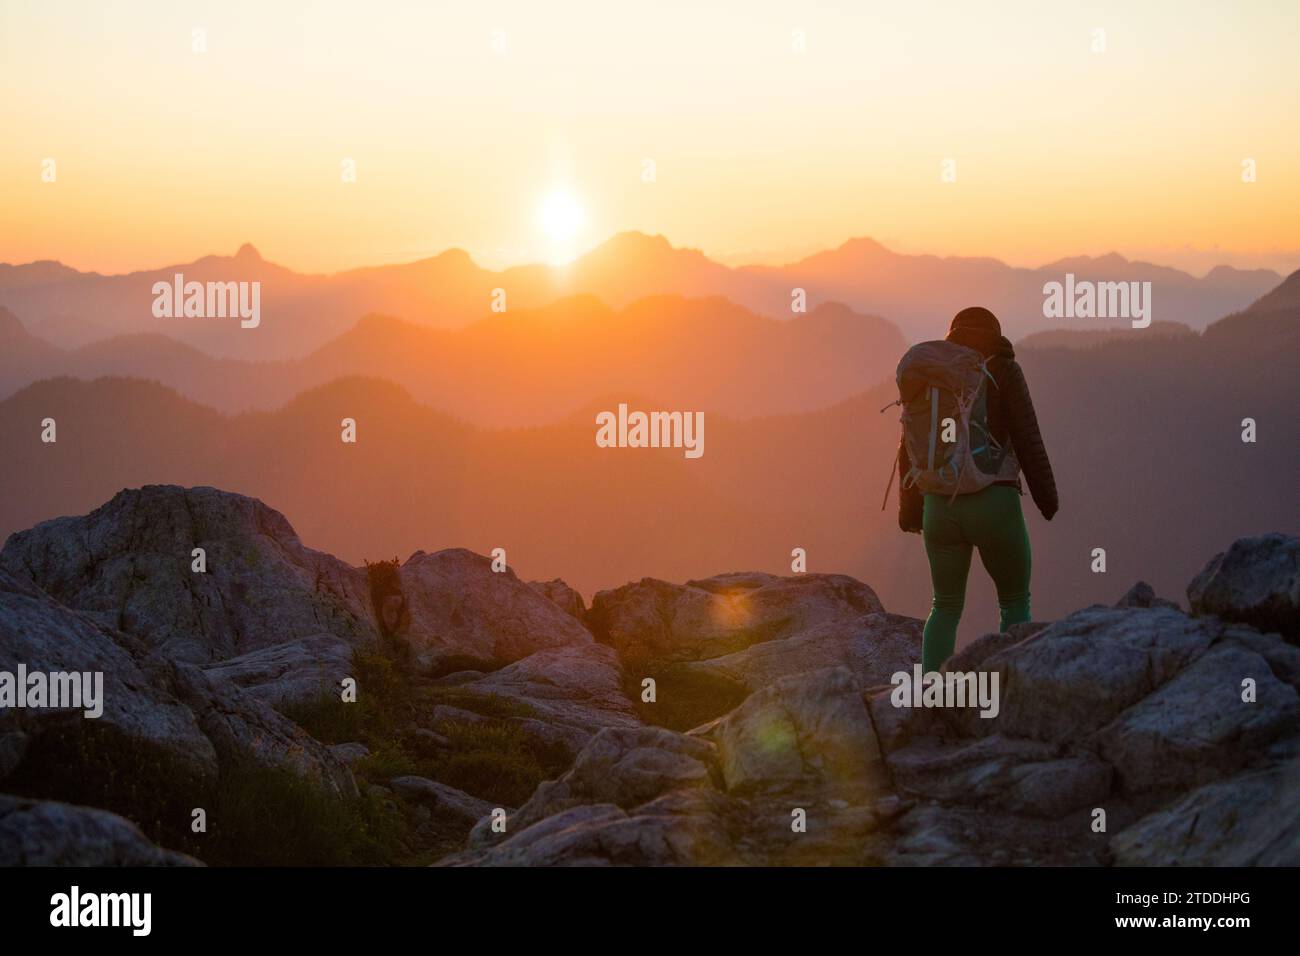 Backpacker hiking on mountain summit, scenic view at sunset Stock Photo